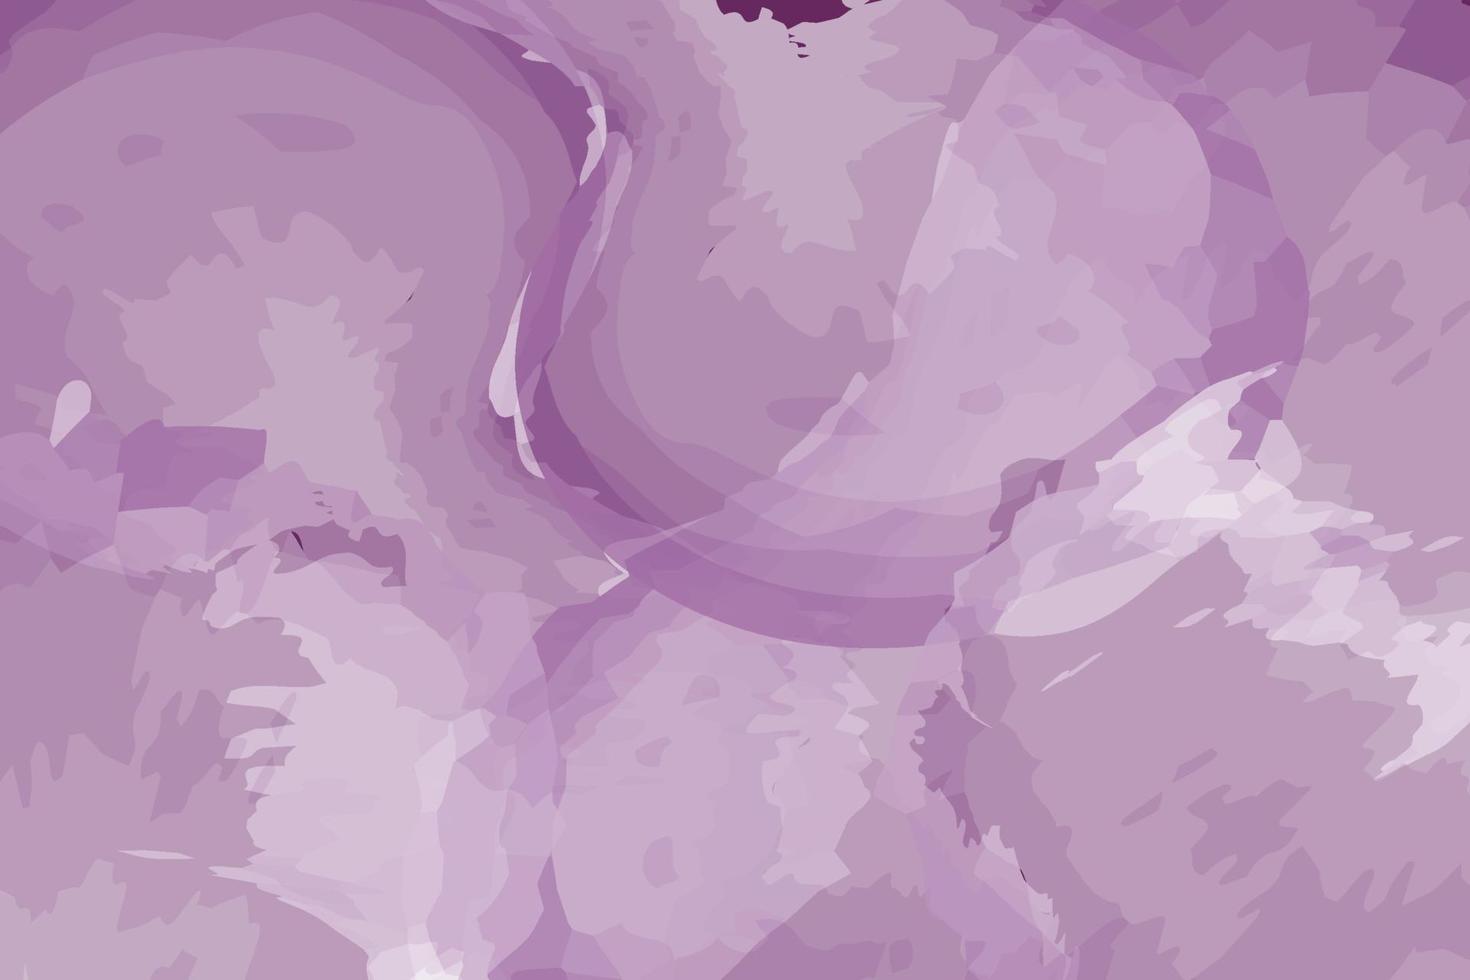 abstract purple watercolor background, paper texture abstract background, natural stones, watercolor like clouds. vector